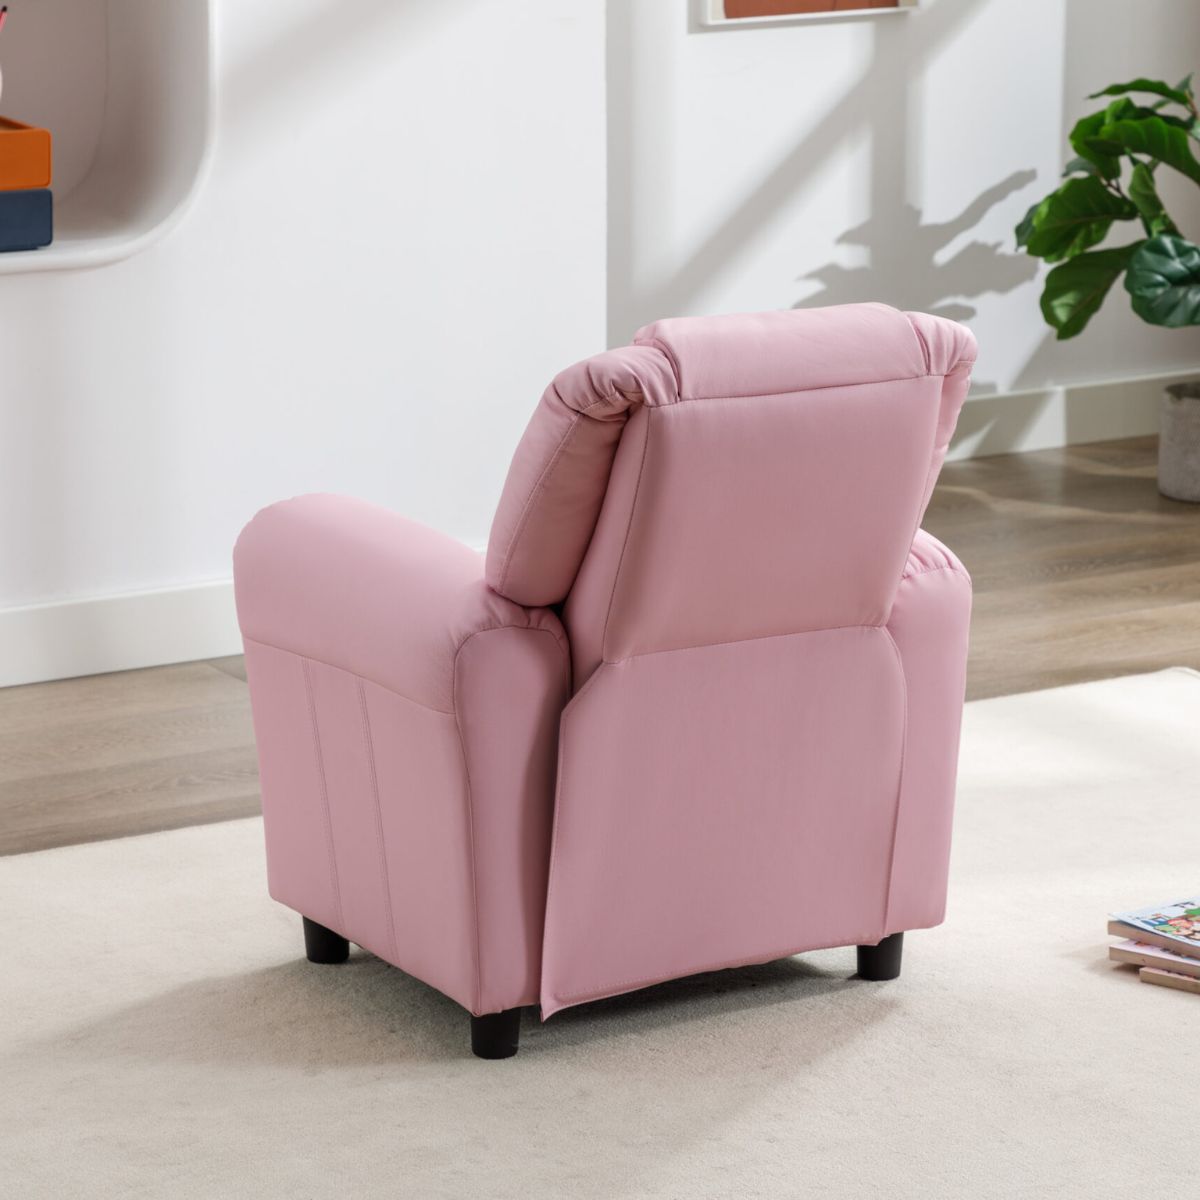 Kids Recliner Chair with Cup Holder Light Pink - 4